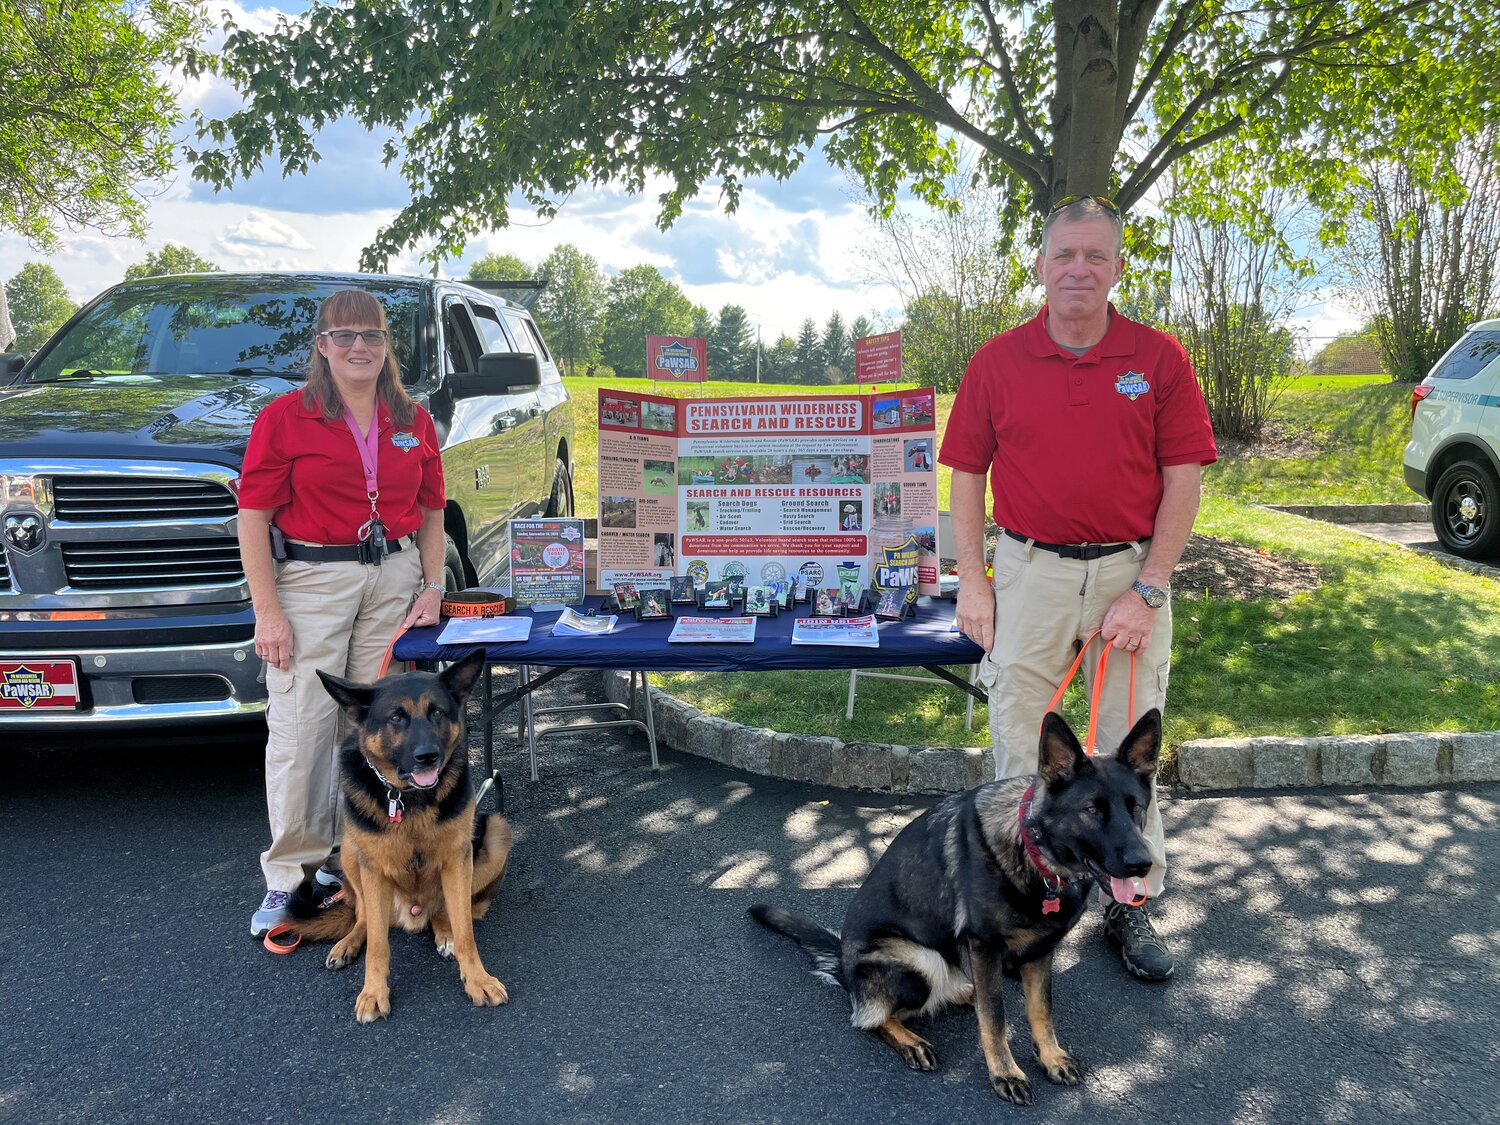 Representatives of Pennsylvania Wilderness Search and Rescue — PAWSAR — man the organization’s table at Doylestown Township’s National Night Out event Tuesday at Central Park.